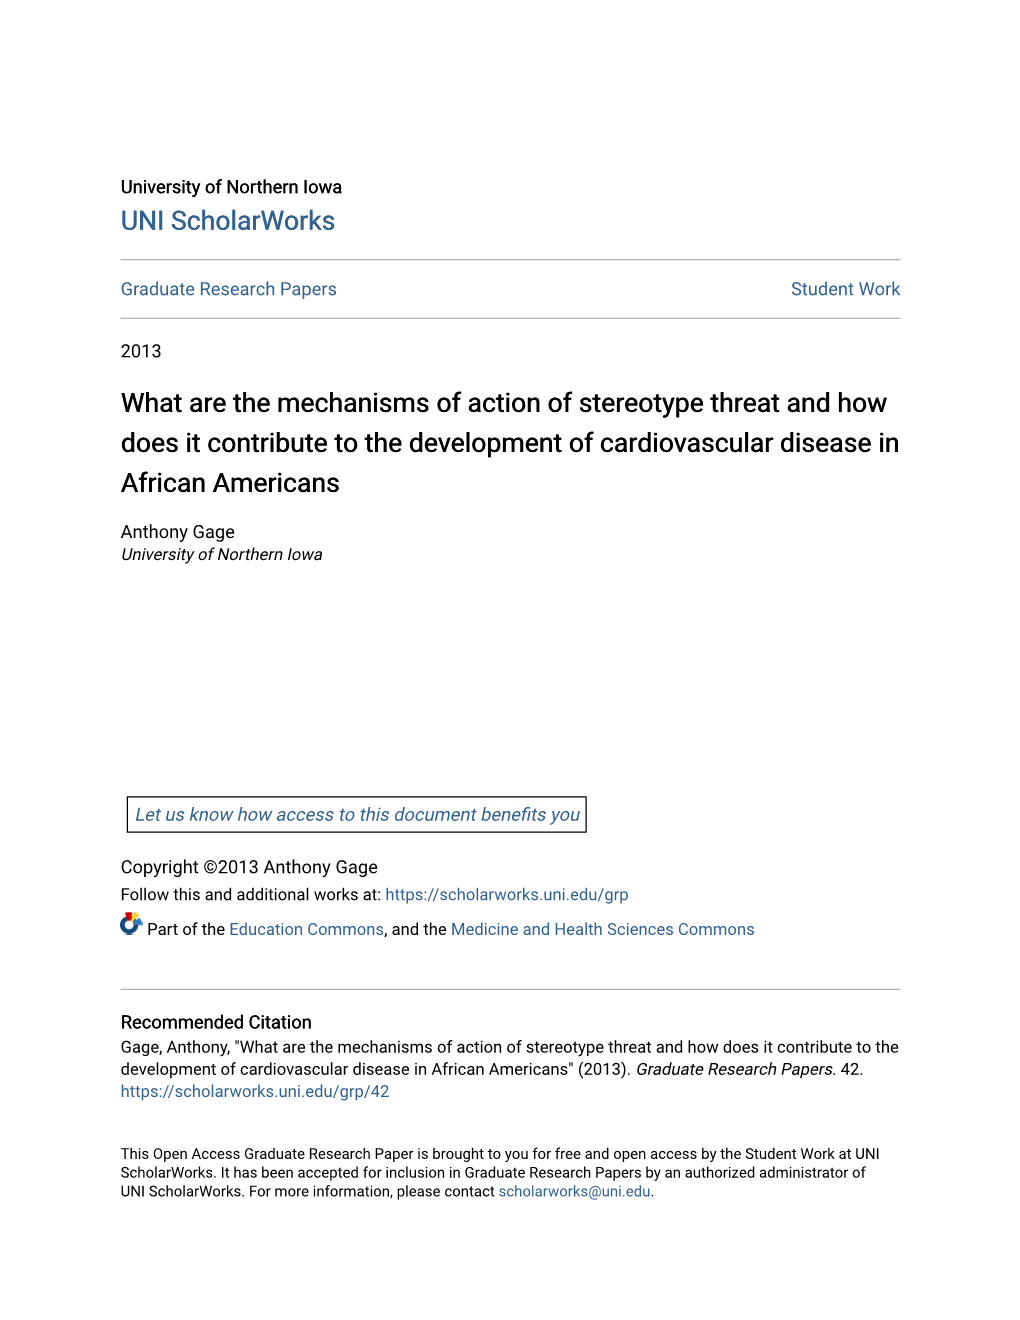 What Are the Mechanisms of Action of Stereotype Threat and How Does It Contribute to the Development of Cardiovascular Disease in African Americans